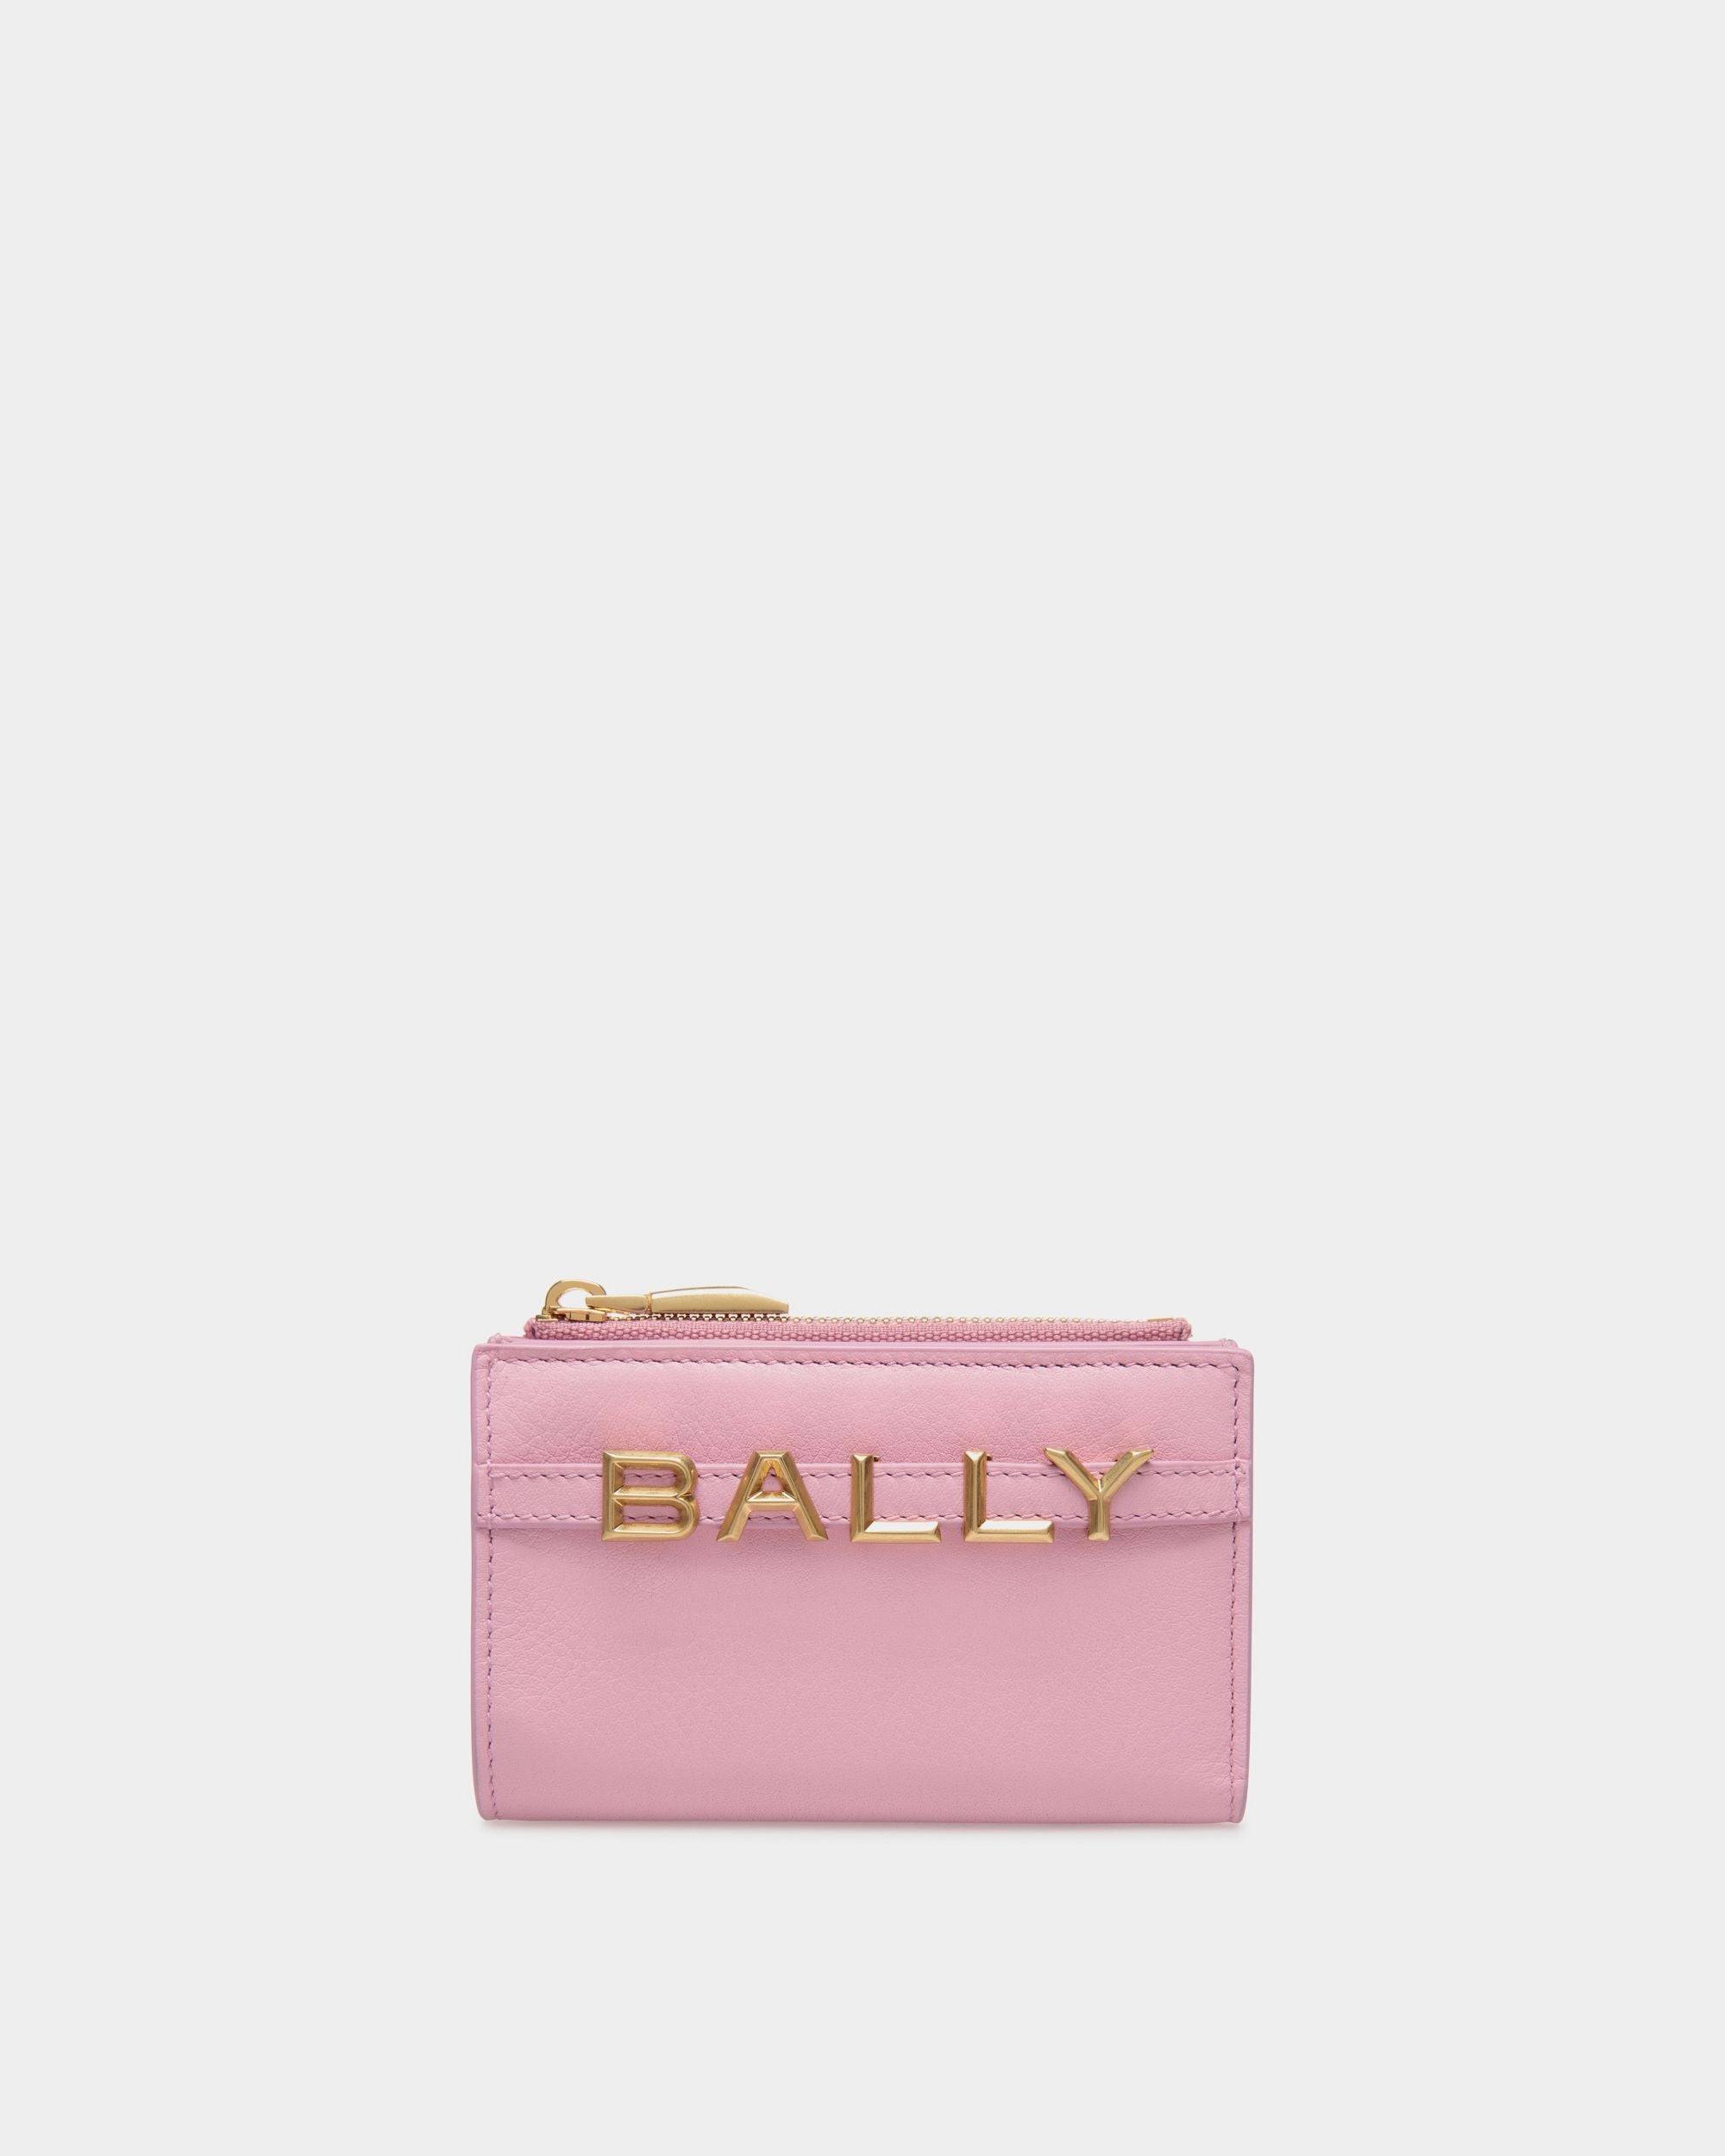 Bally Spell | Women's Wallet in Pink Leather | Bally | Still Life Front